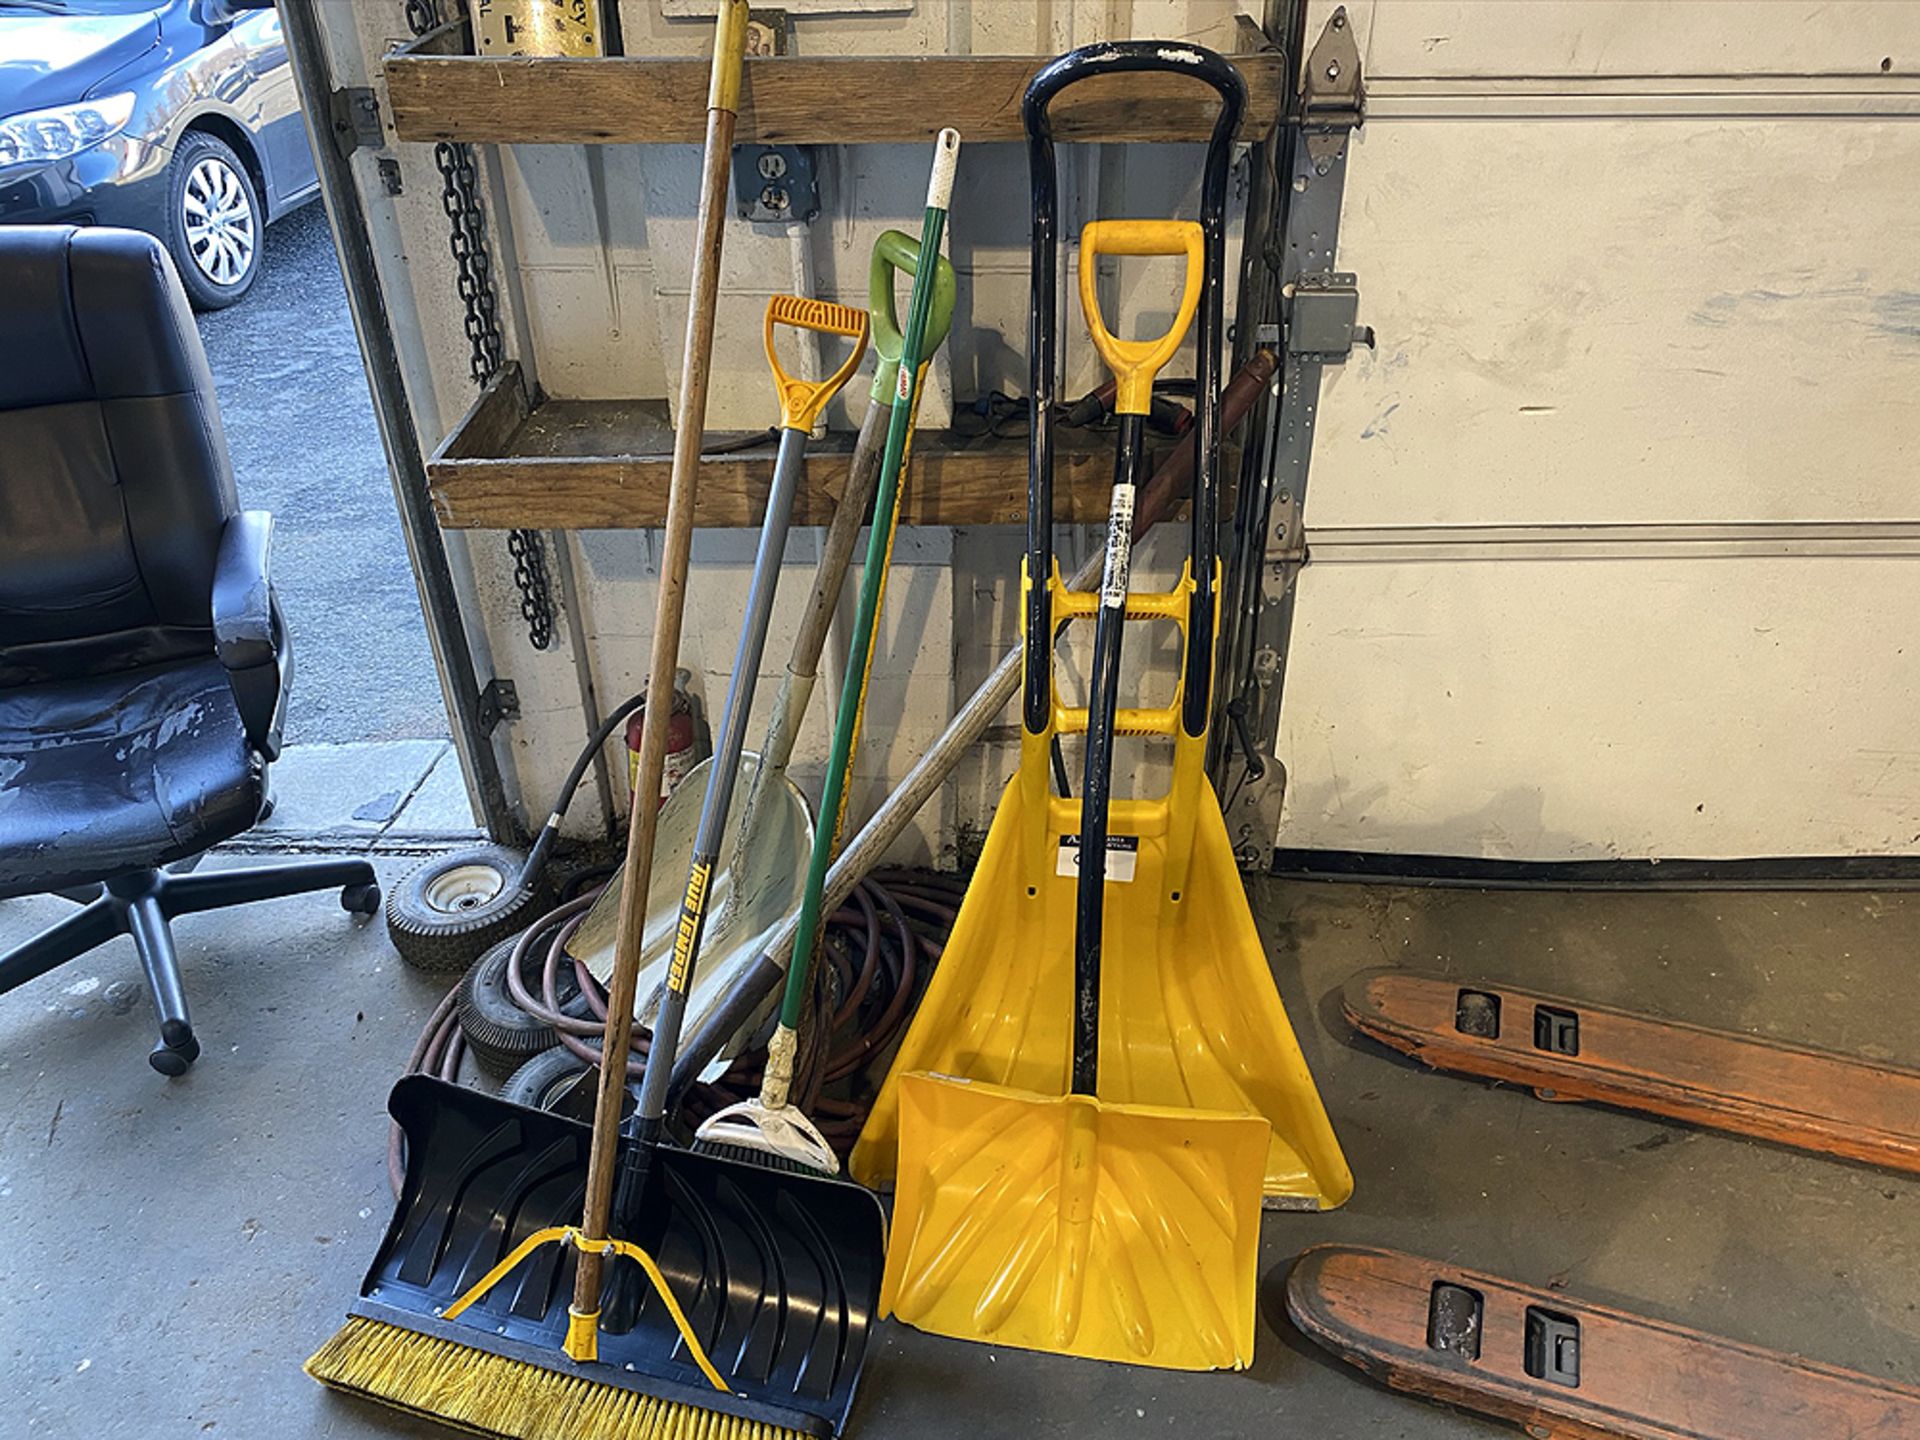 Ass't Shovels and Brooms